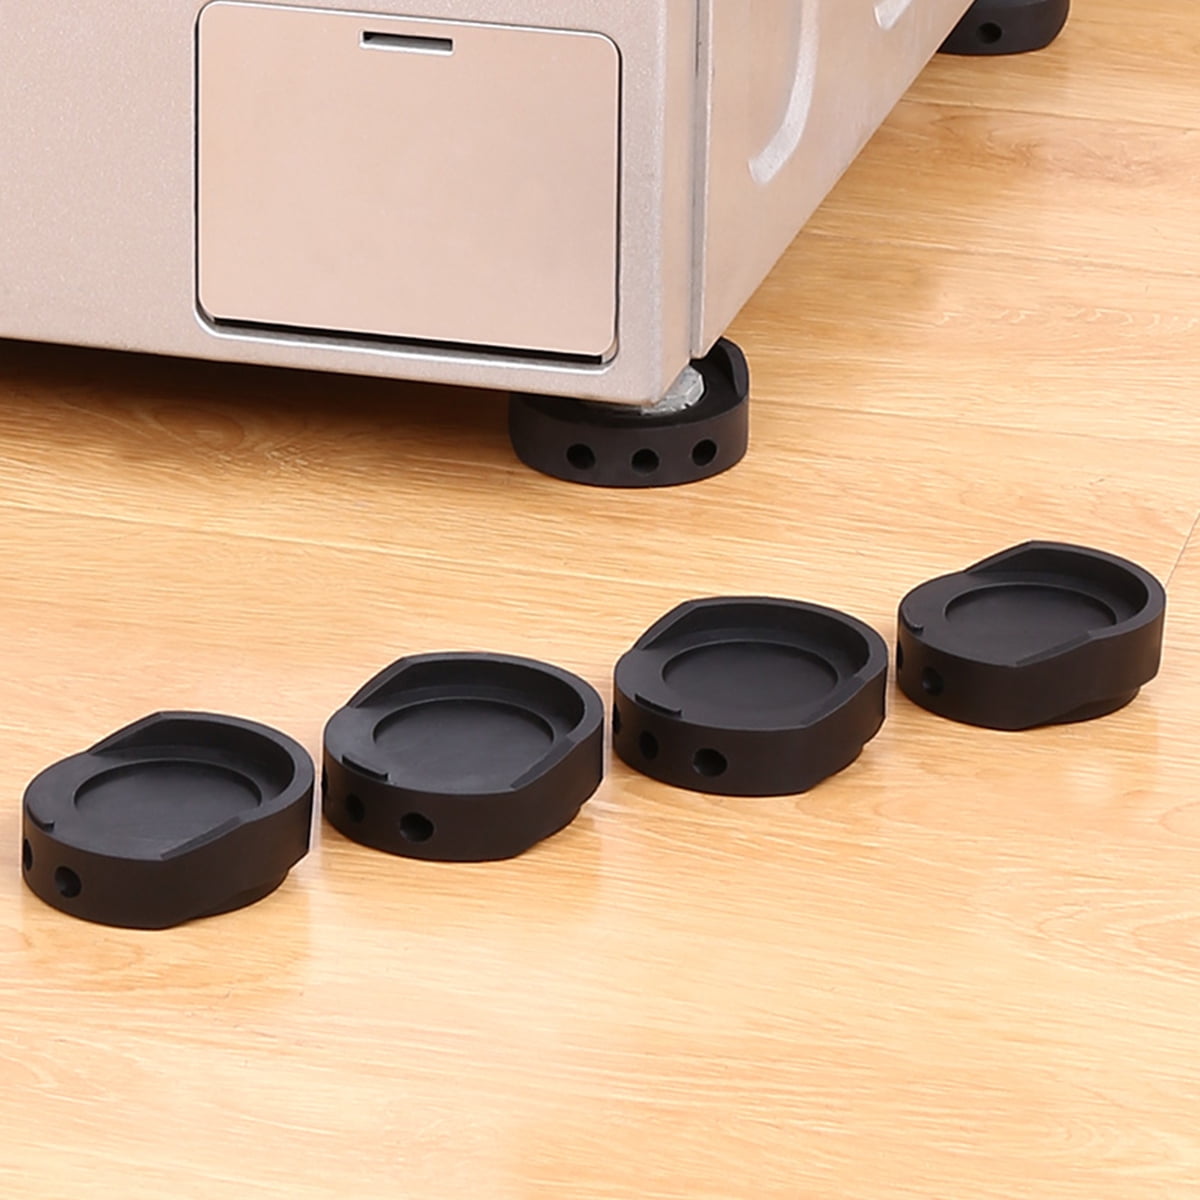 Customized Anti-Walk Silent Feet Anti-Vibration Rubber Pads for